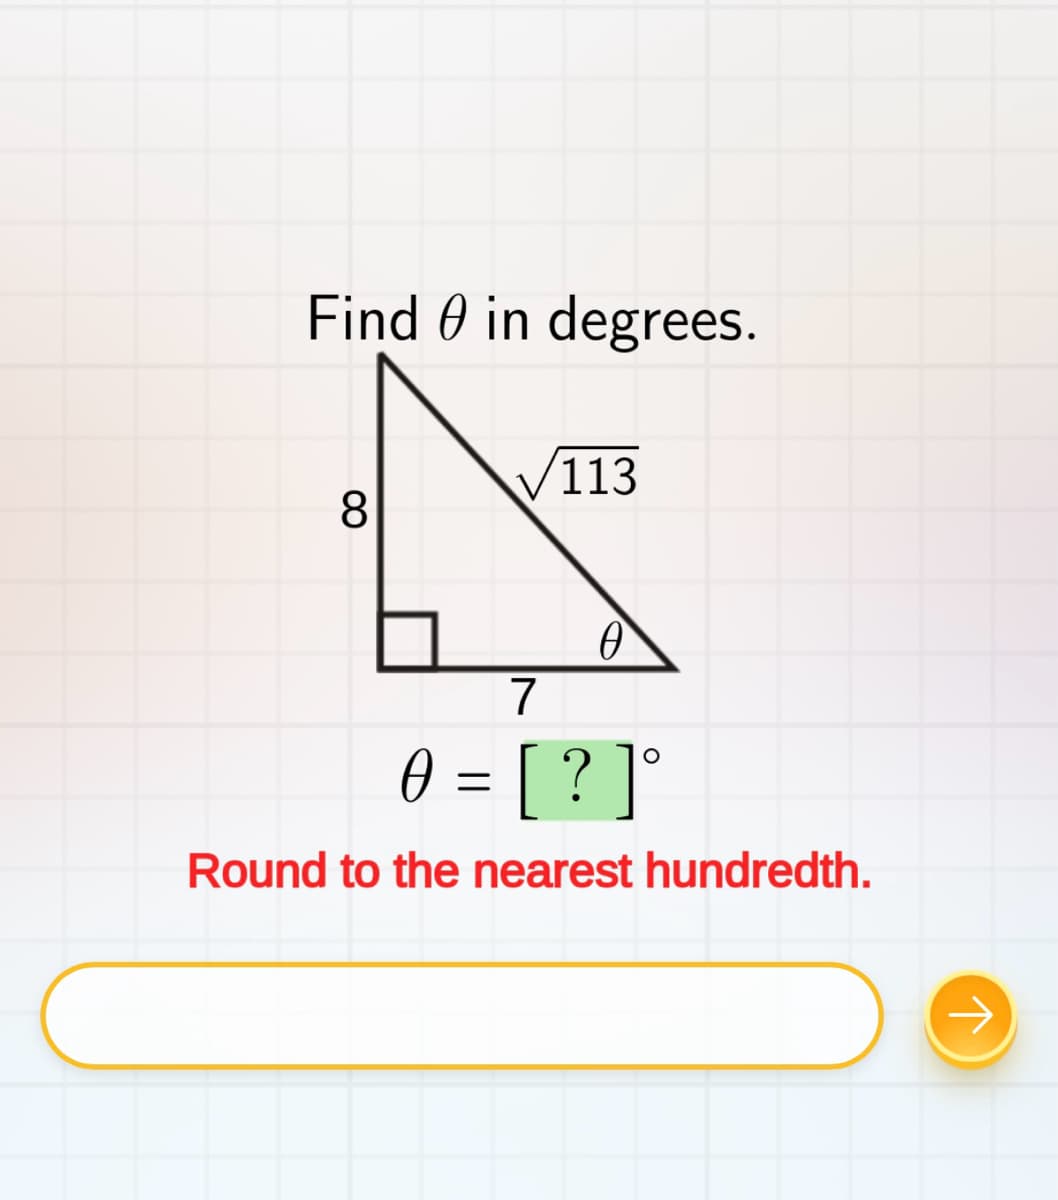 Find in degrees.
8
V113
0
7
0 = [ ? ] °
Round to the nearest hundredth.